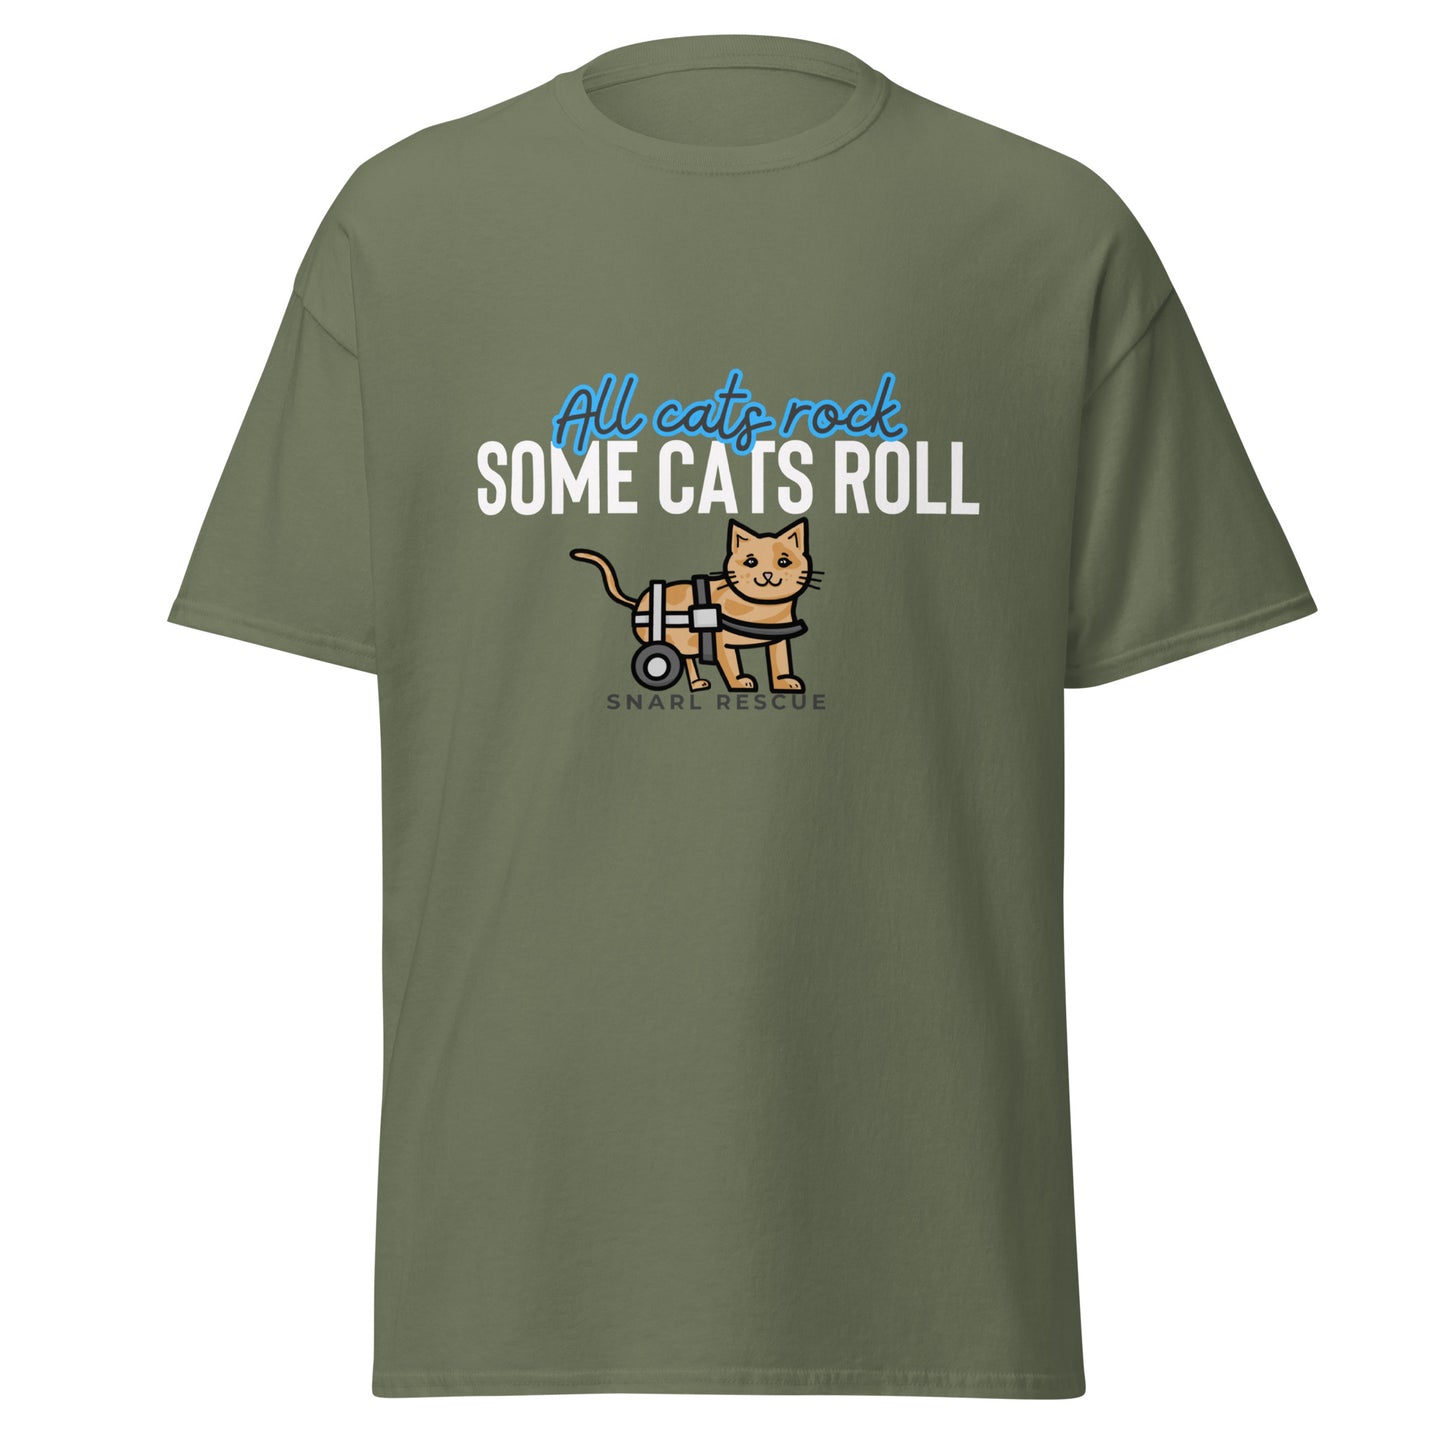 The "All Cats Rock, Some Cats Roll" Tee